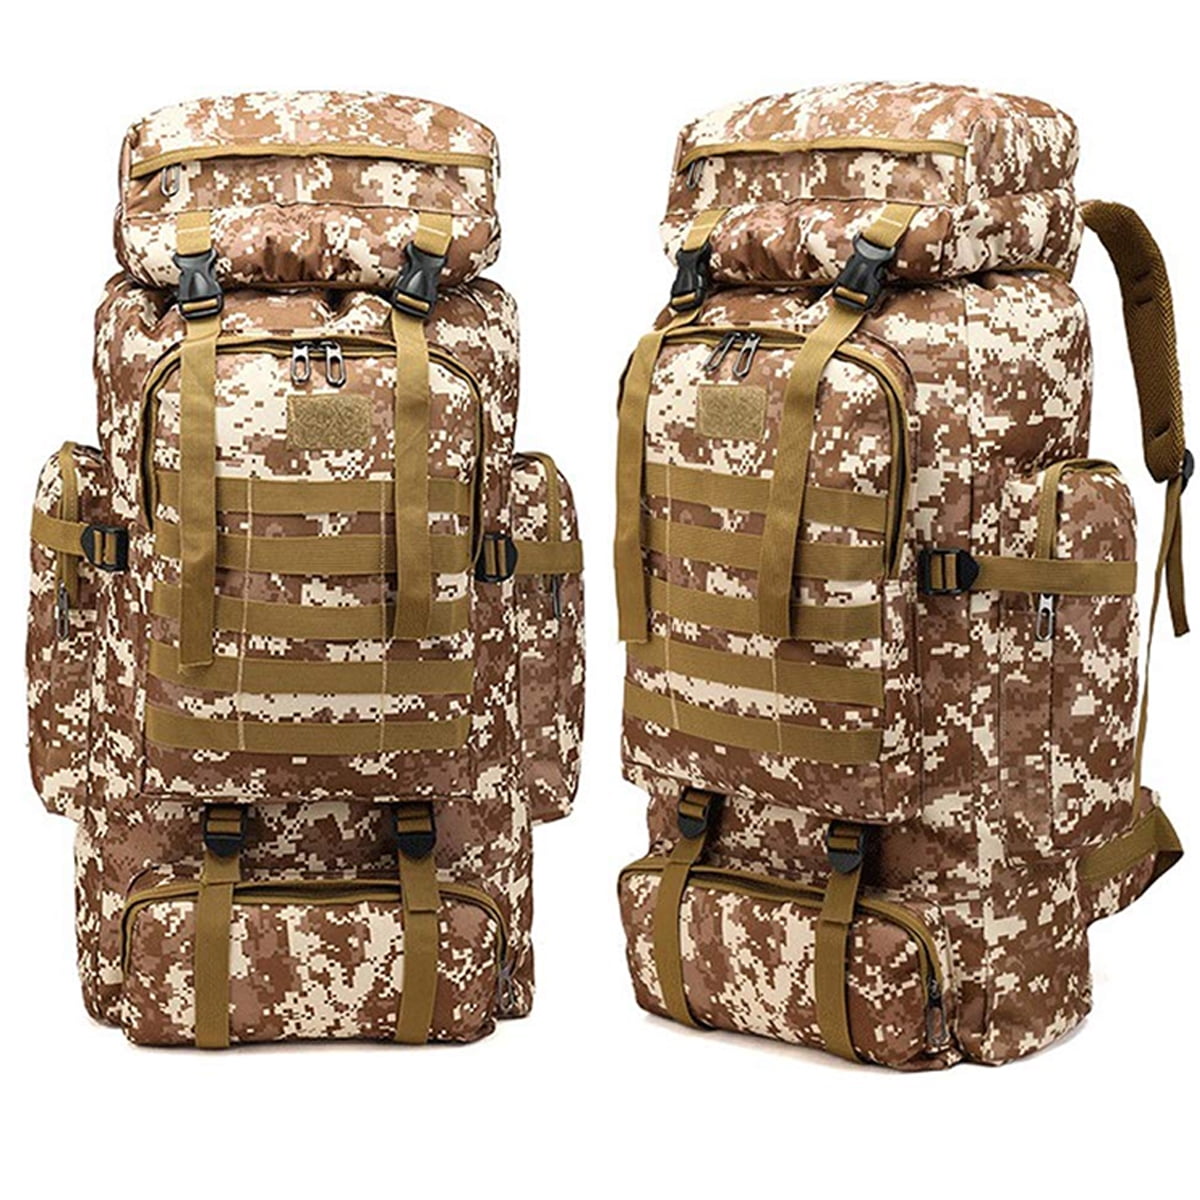 Tactical Army Military Camo 80L Trekking Survival Bug Out Bag Backpack Rucksack 